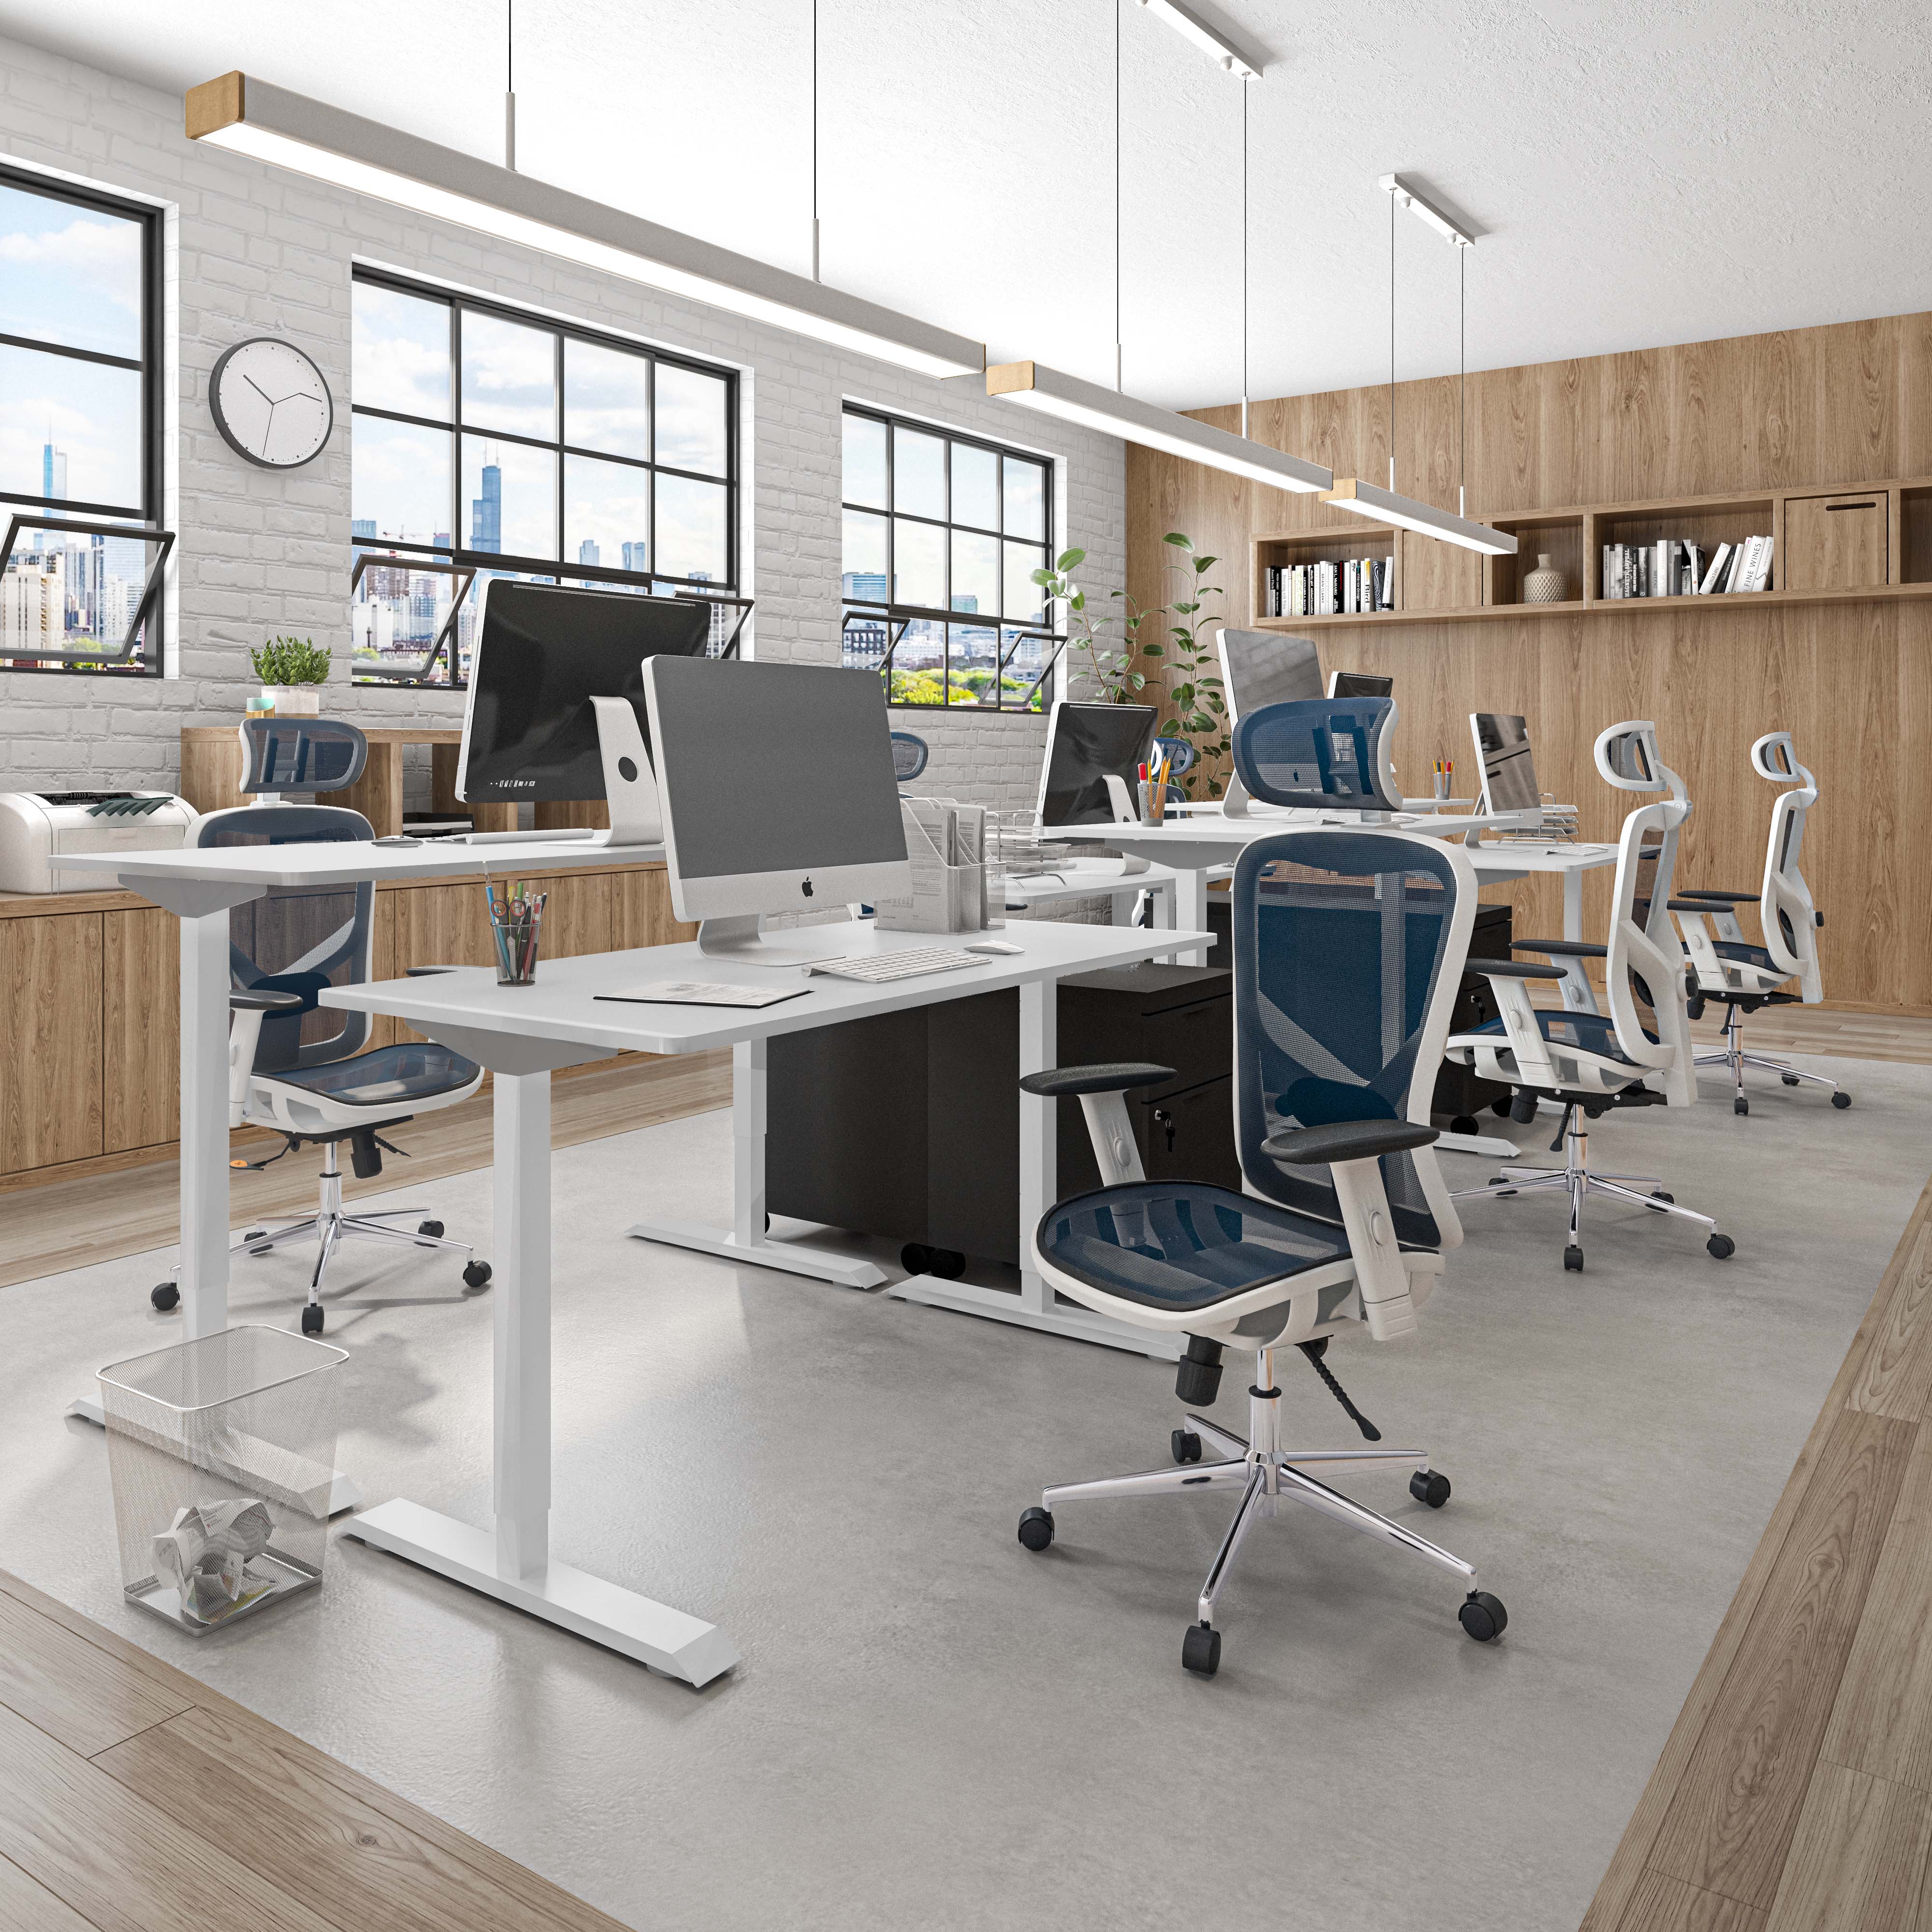 Task Chair with Headrest, Standing Desk Office Chair